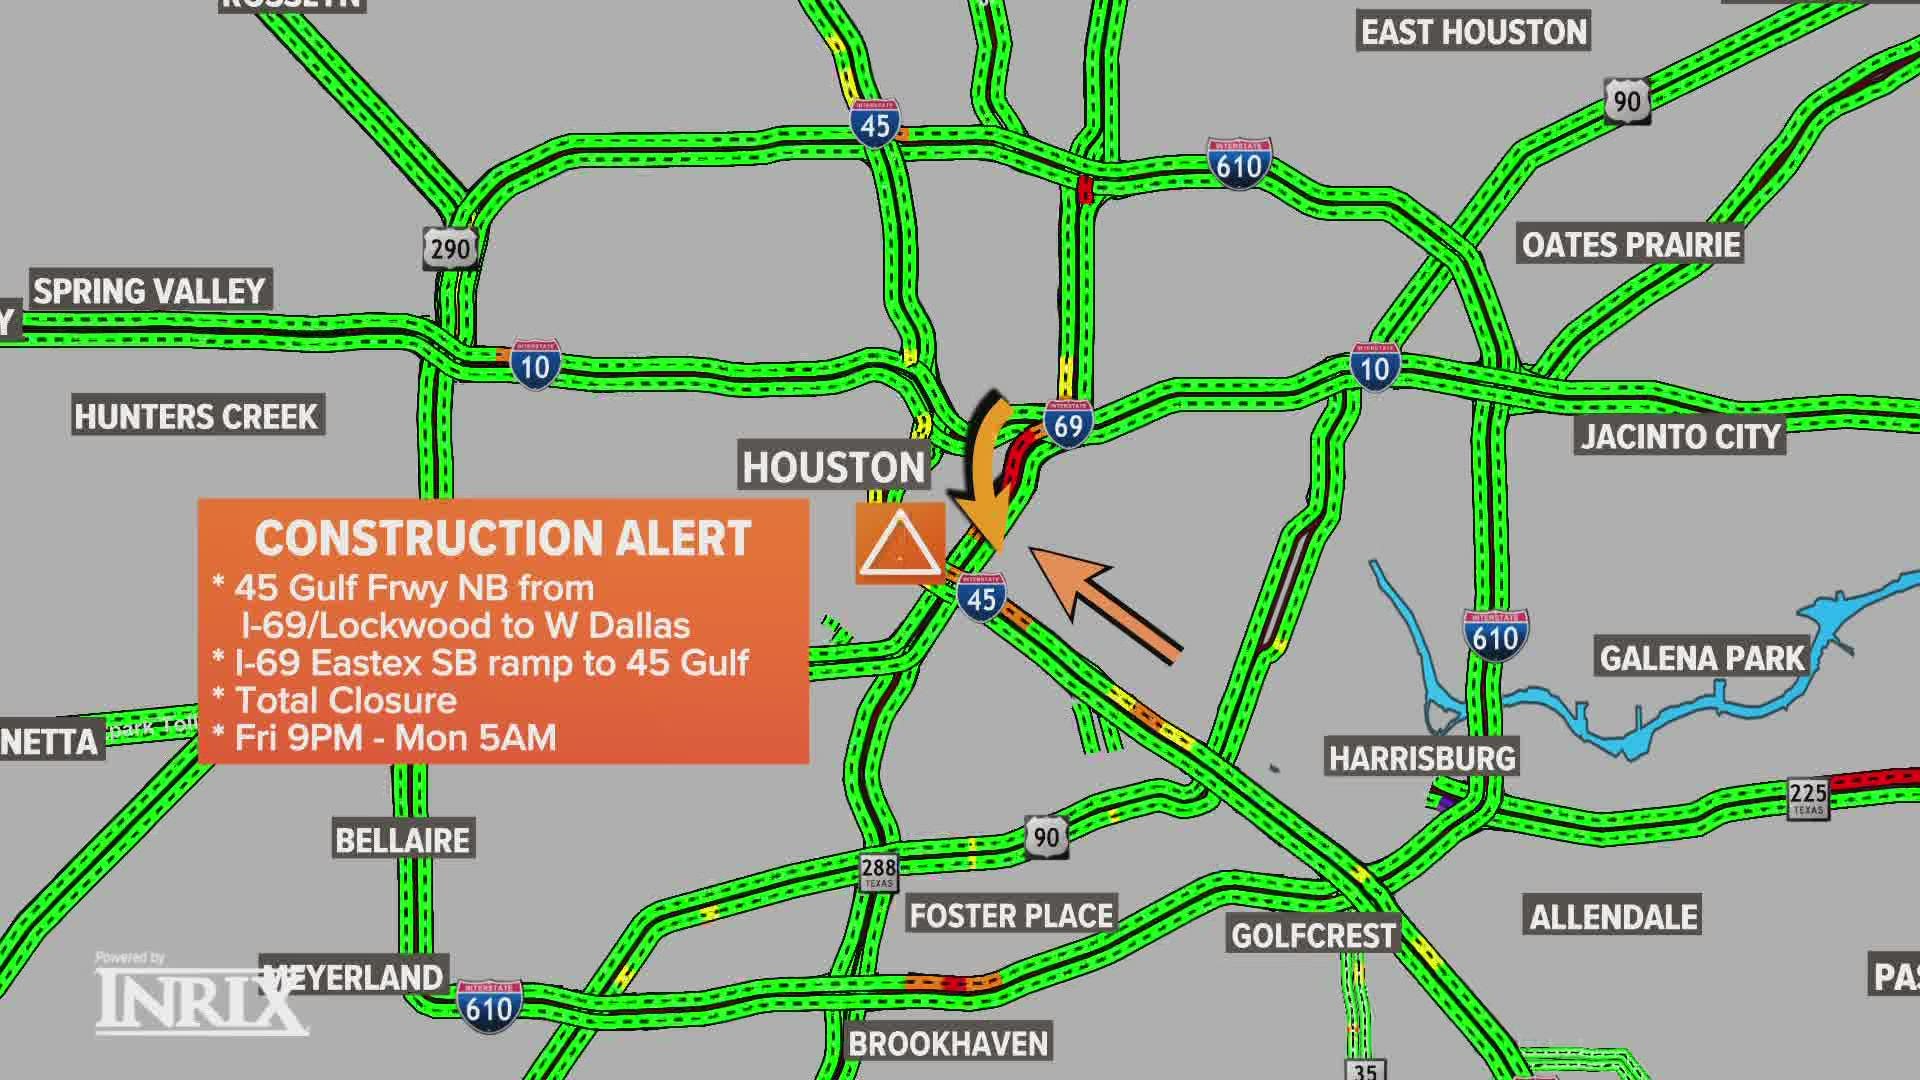 The Texas Department of Transportation will close the main lanes of the I-45 Gulf Freeway heading north for repairs in downtown Houston this weekend.